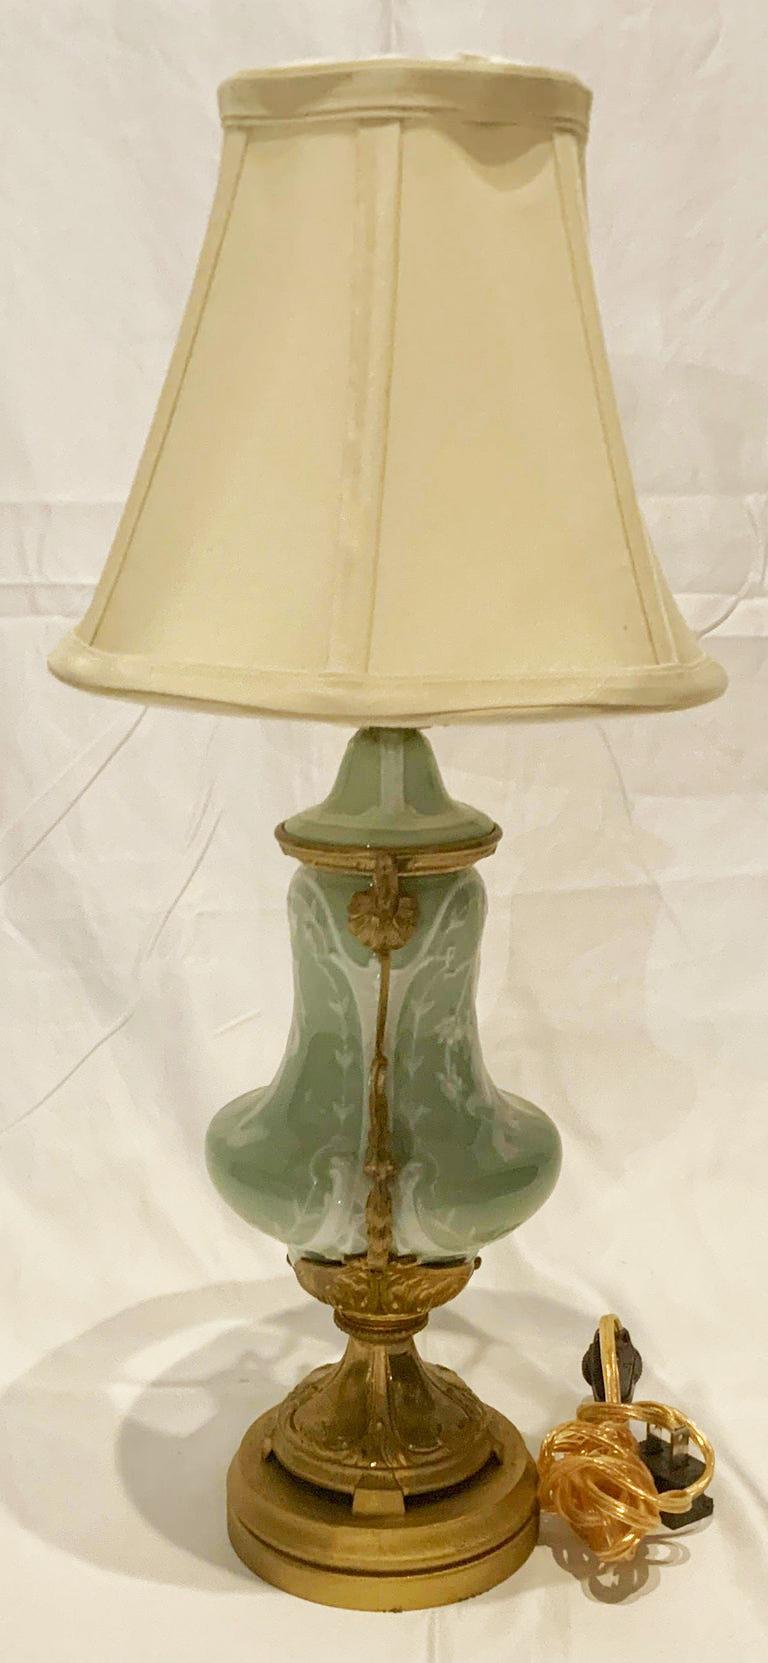 Antique French Celadon Porcelain Lamp with Bronze D' Ore Mounts, circa 1880's In Good Condition For Sale In New Orleans, LA